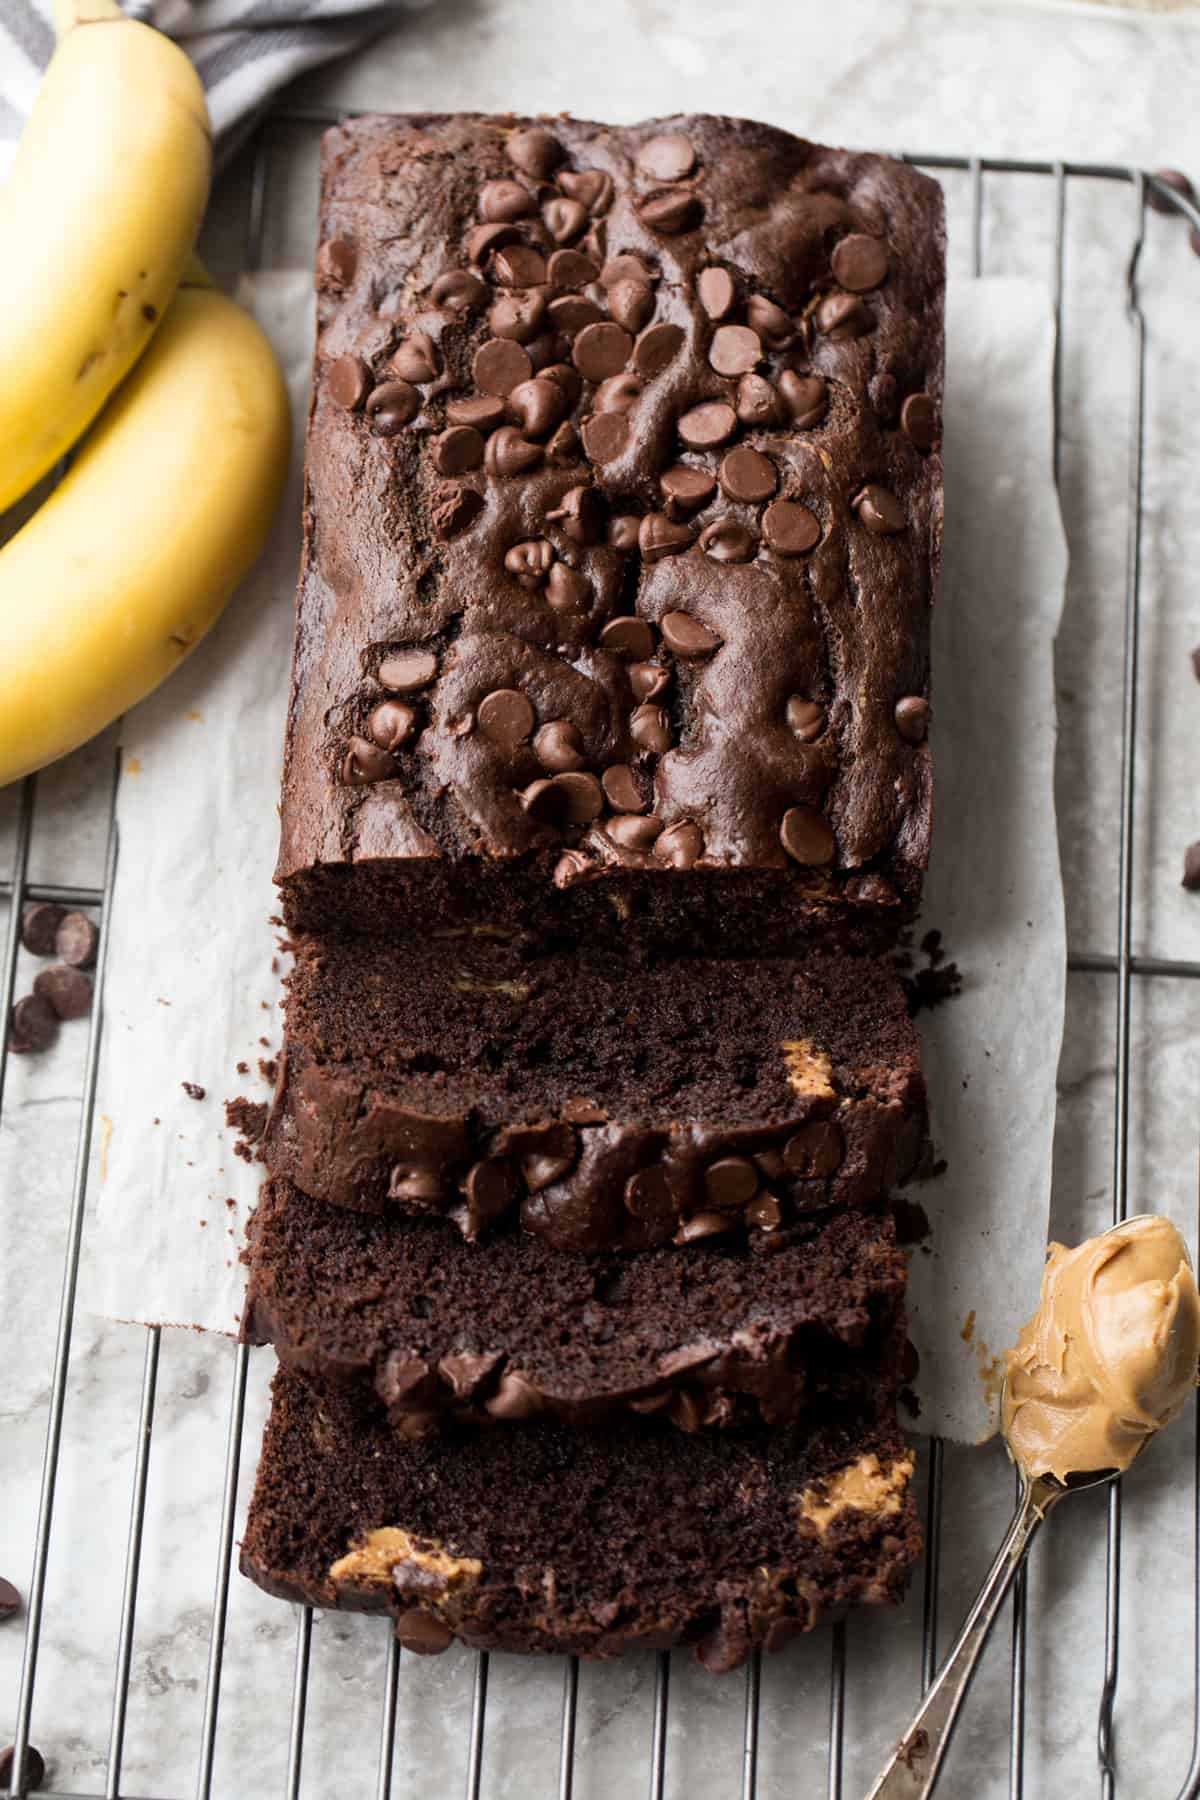 Peanut butter chocolate banana bread load cut into slices. Next to bananas and a spoon of peanut butter.